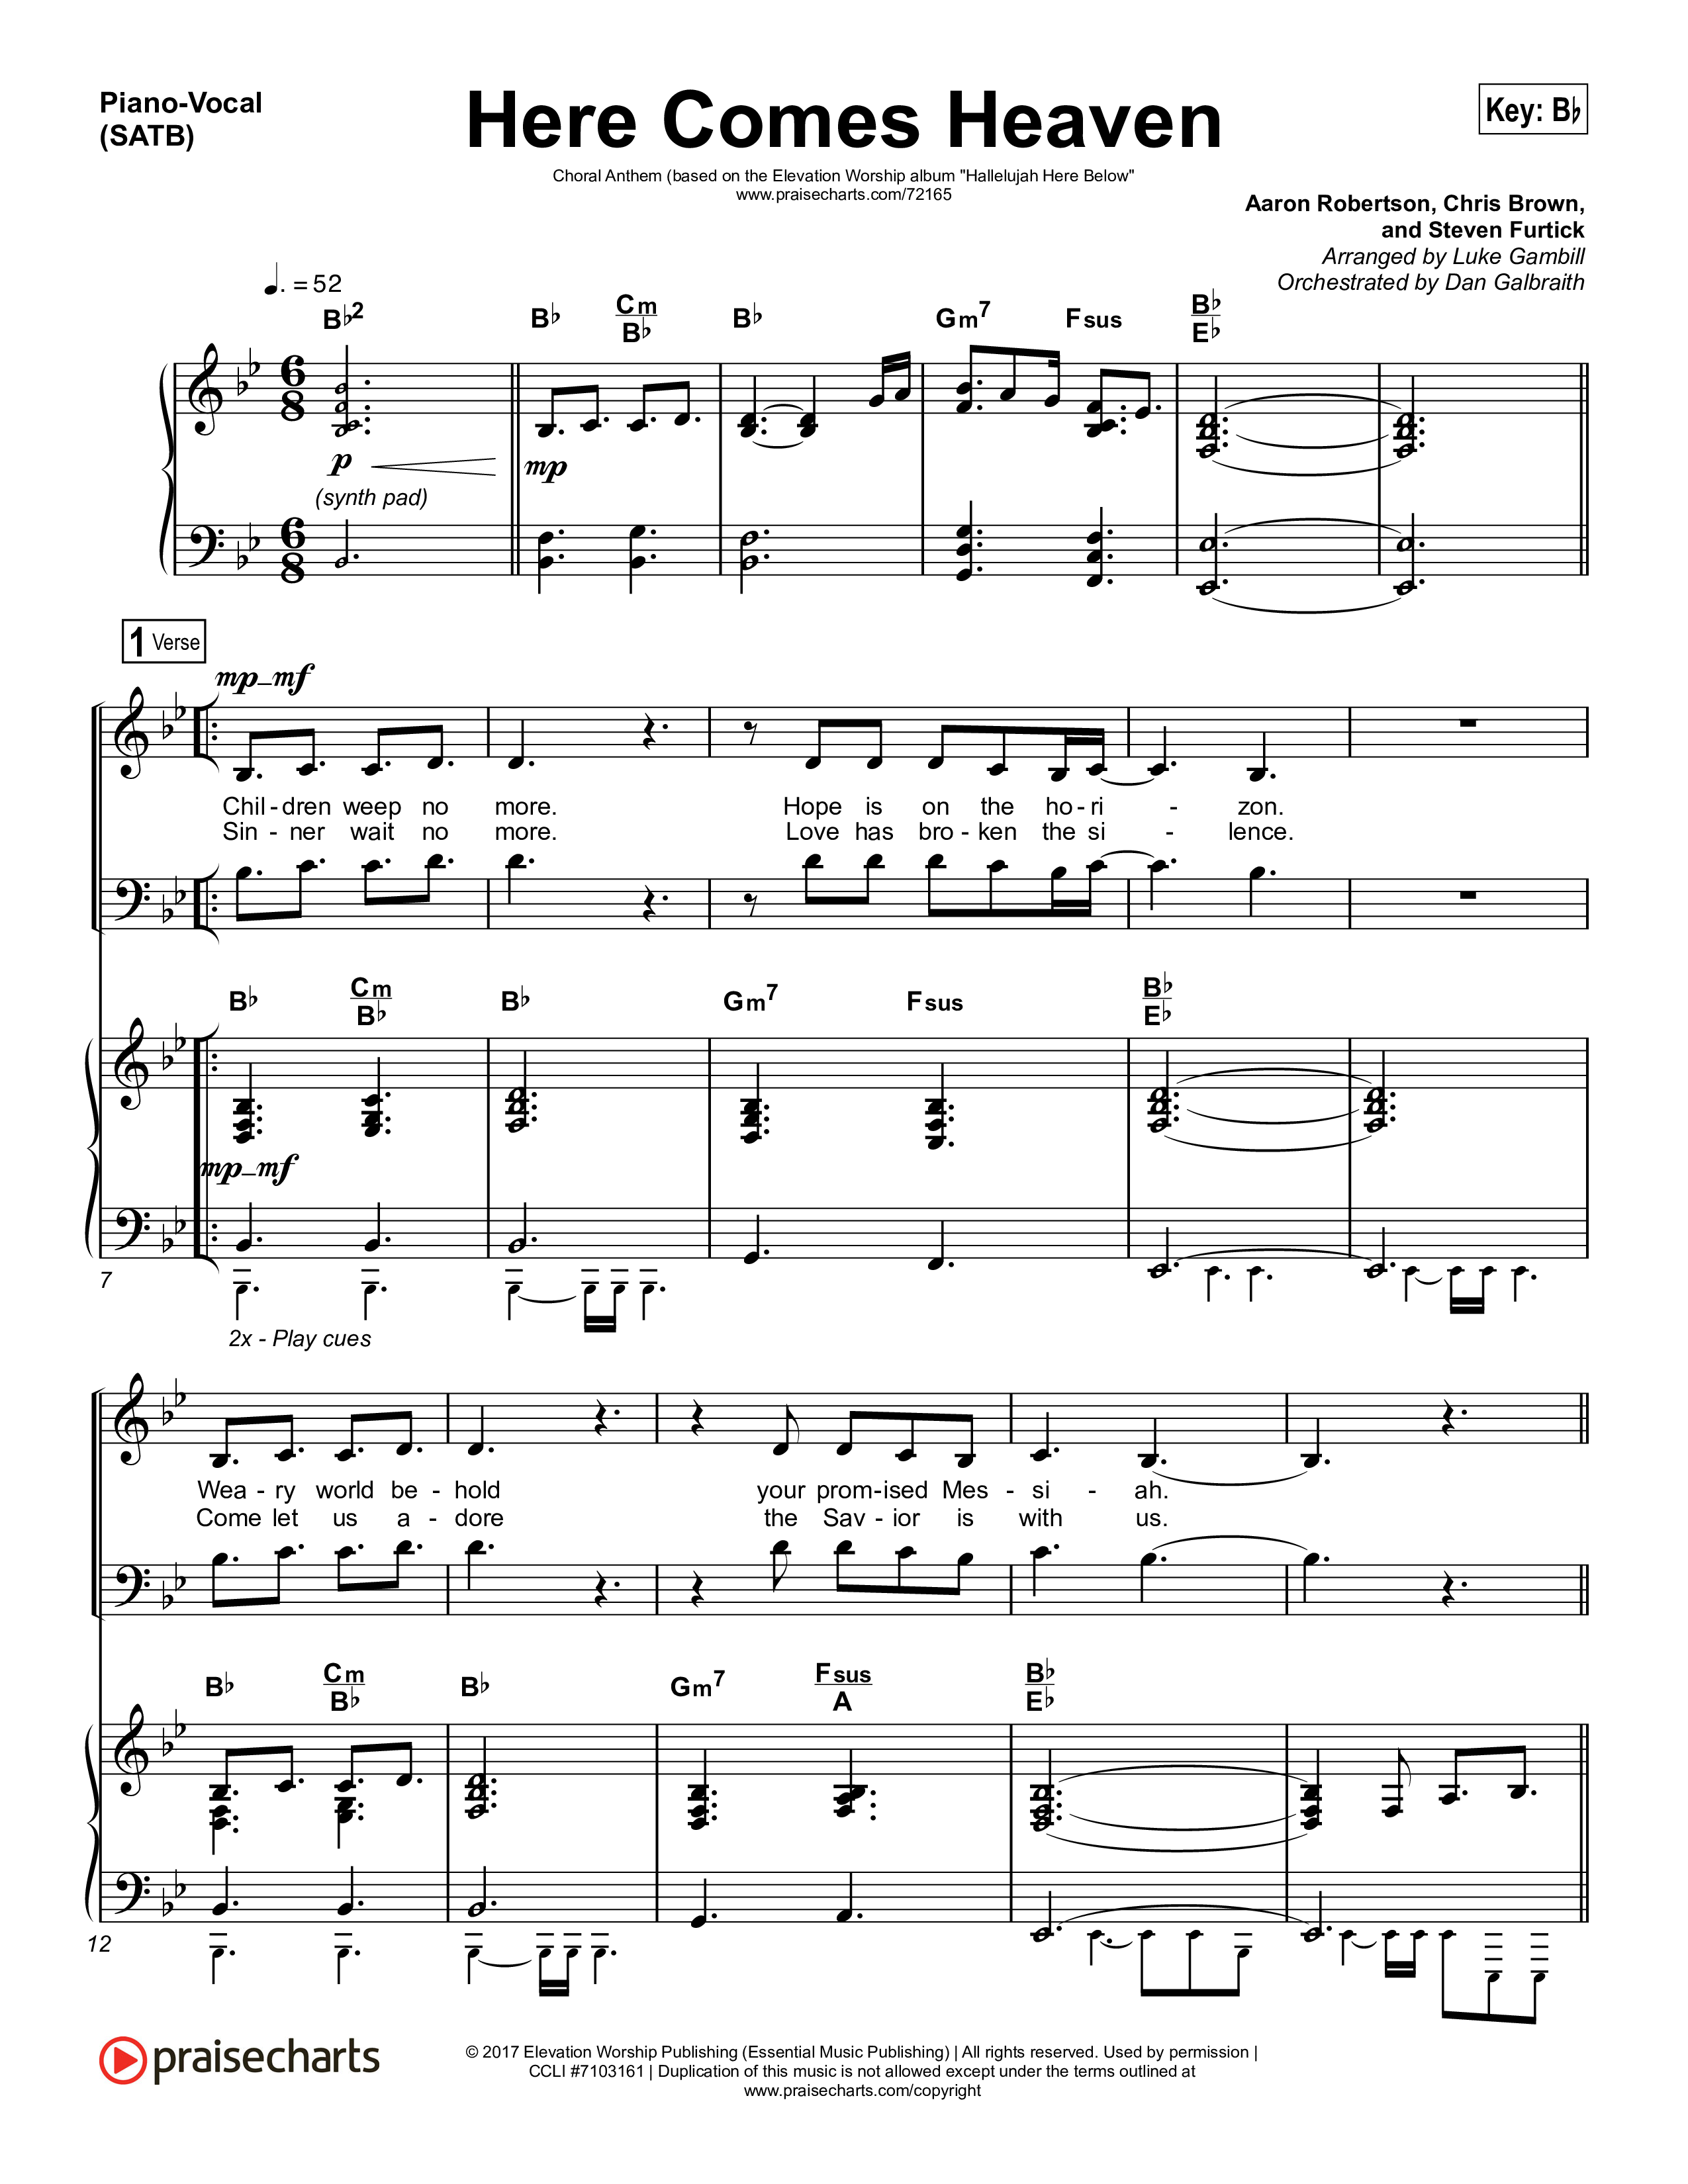 Here Comes Heaven (Choral Anthem SATB) Piano/Vocal Pack (Elevation Worship / Arr. Luke Gambill)